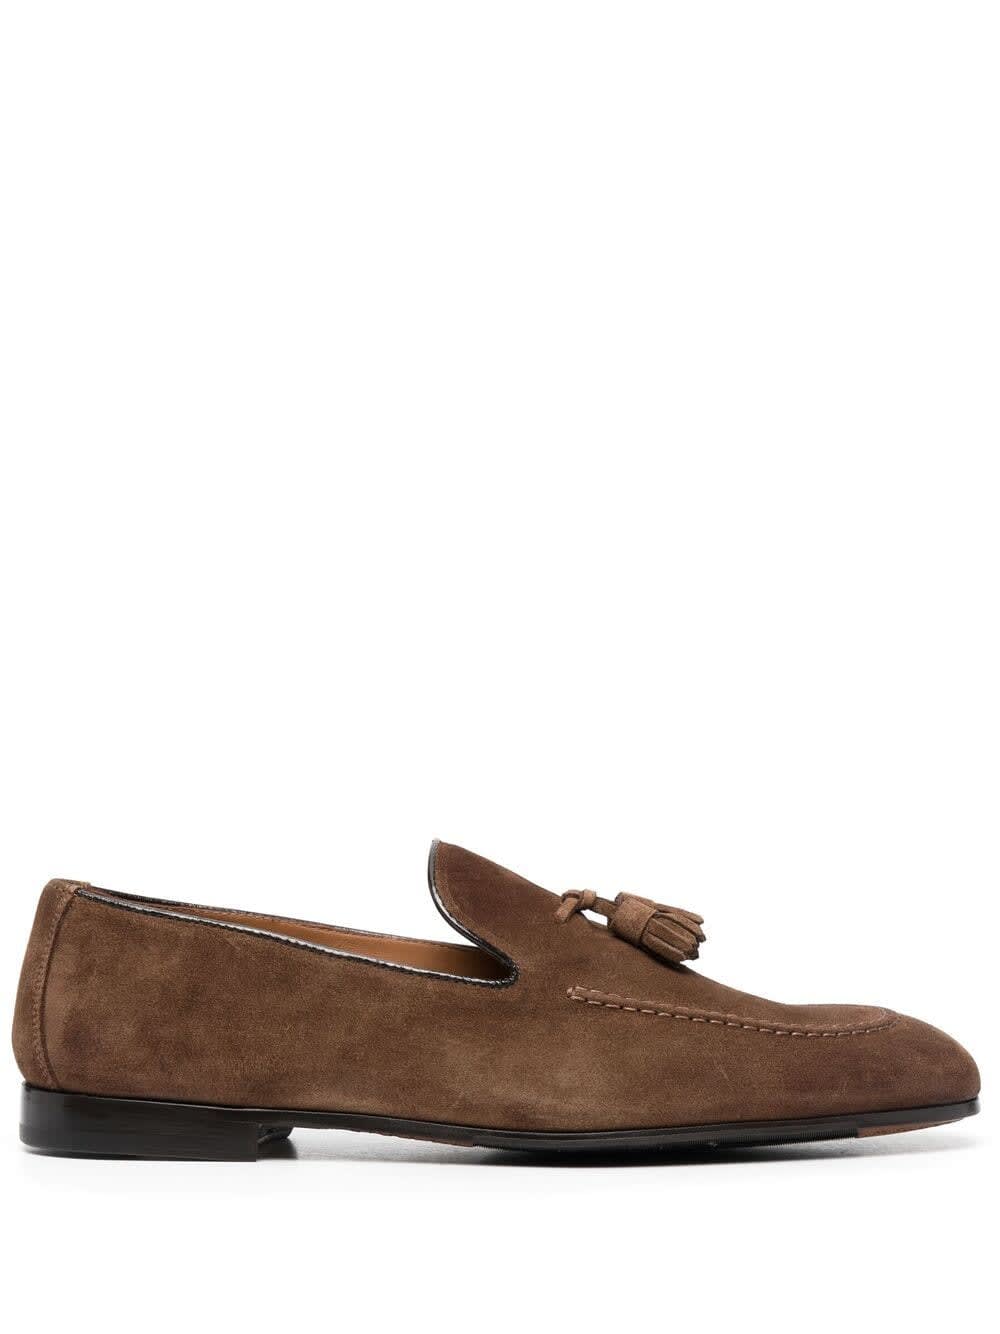 Doucals Man Loafer With Tassels In Brown Suede